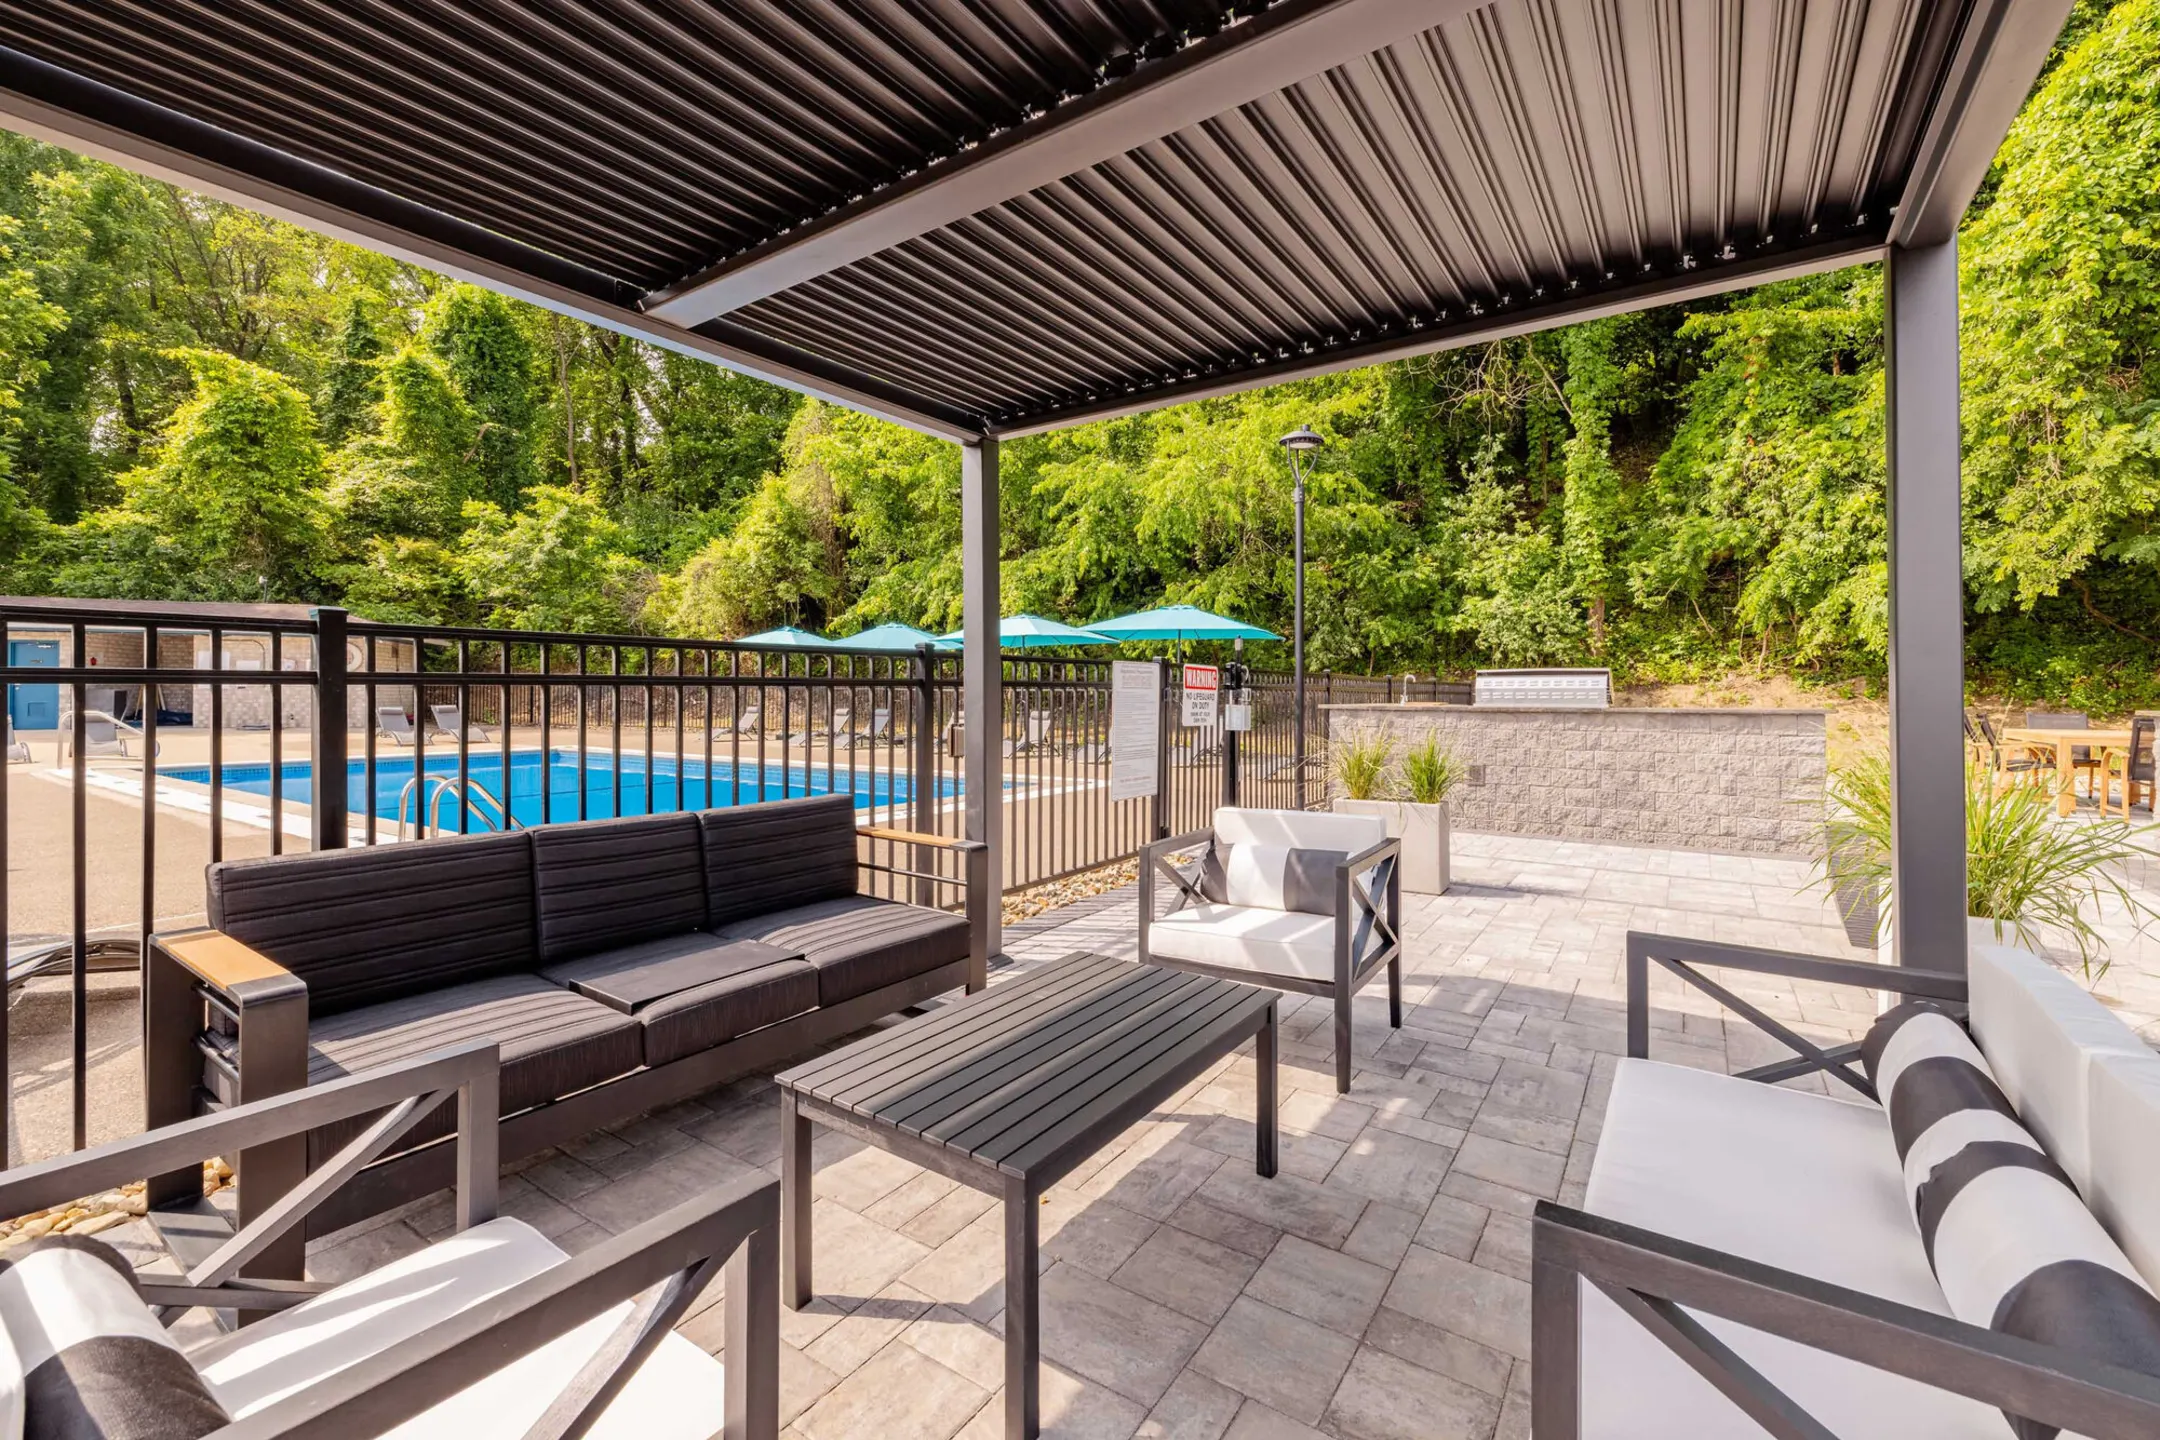 Patio / Deck - The Flats at Fox Hill - Monroeville, PA